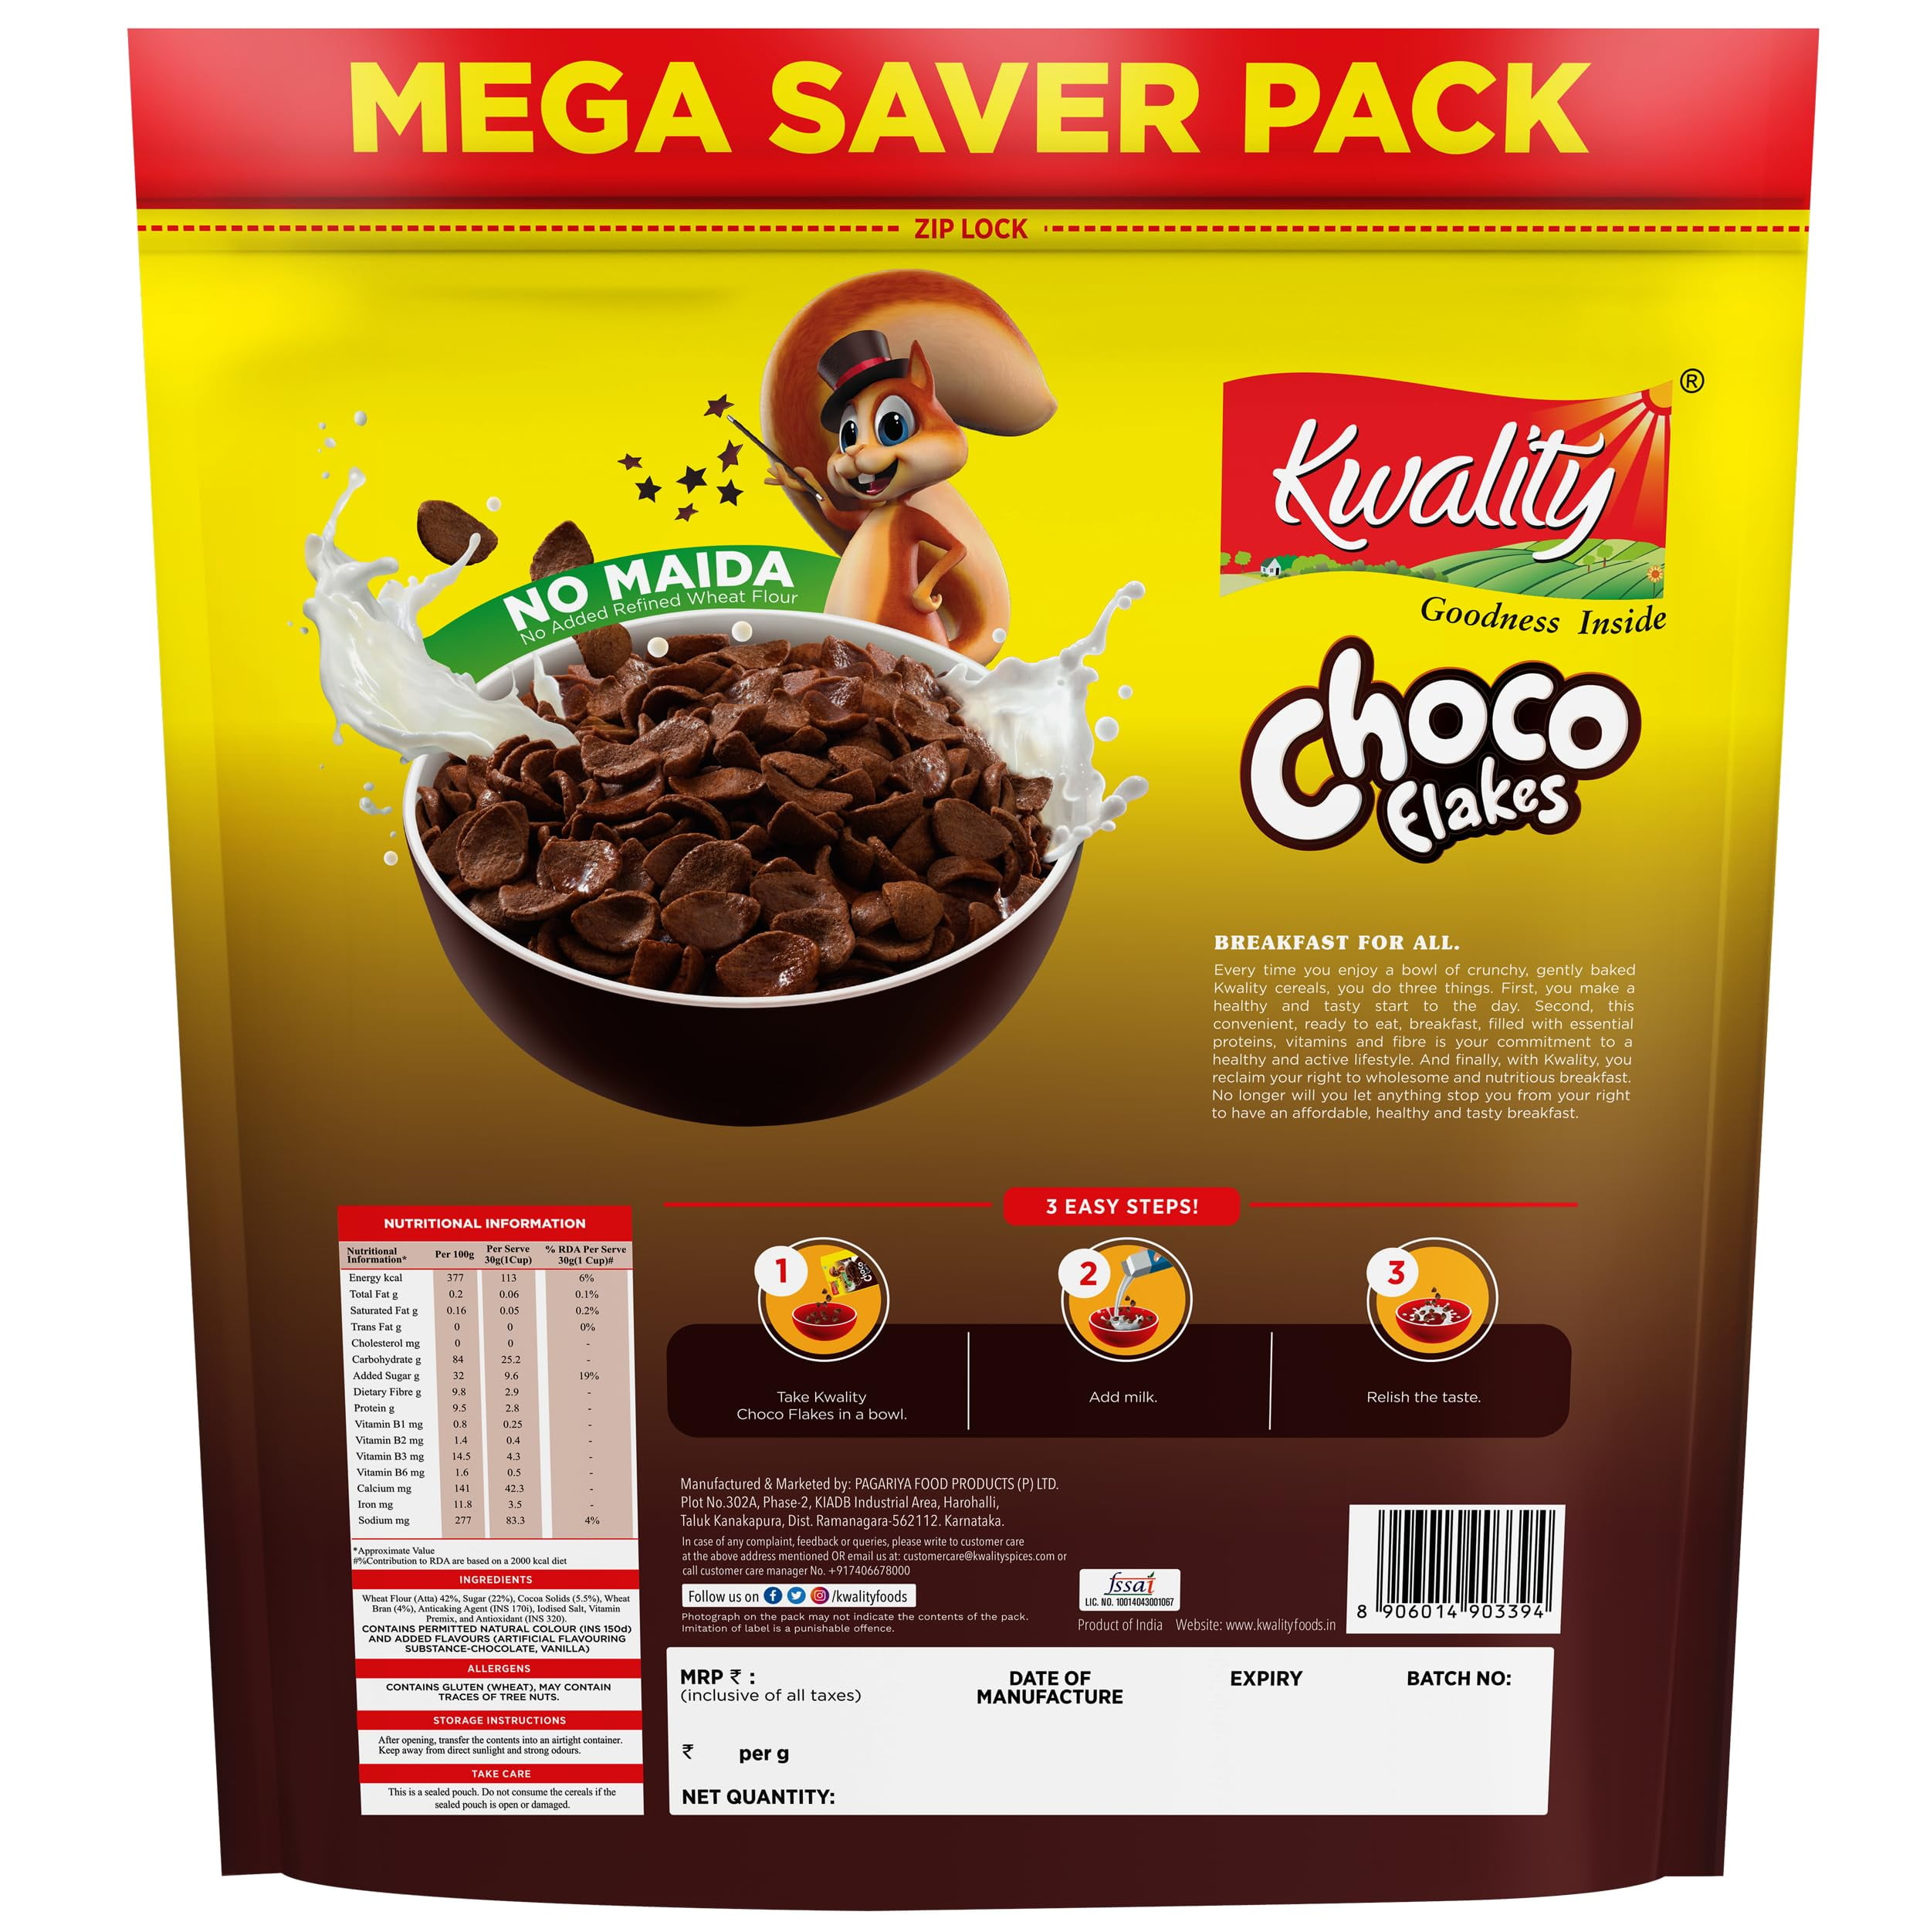 Kwality Choco Flakes 375g (Pack 2), Made with Whole Wheat, 0% Maida, Source of Protein & Fiber, Richness of Chocolate